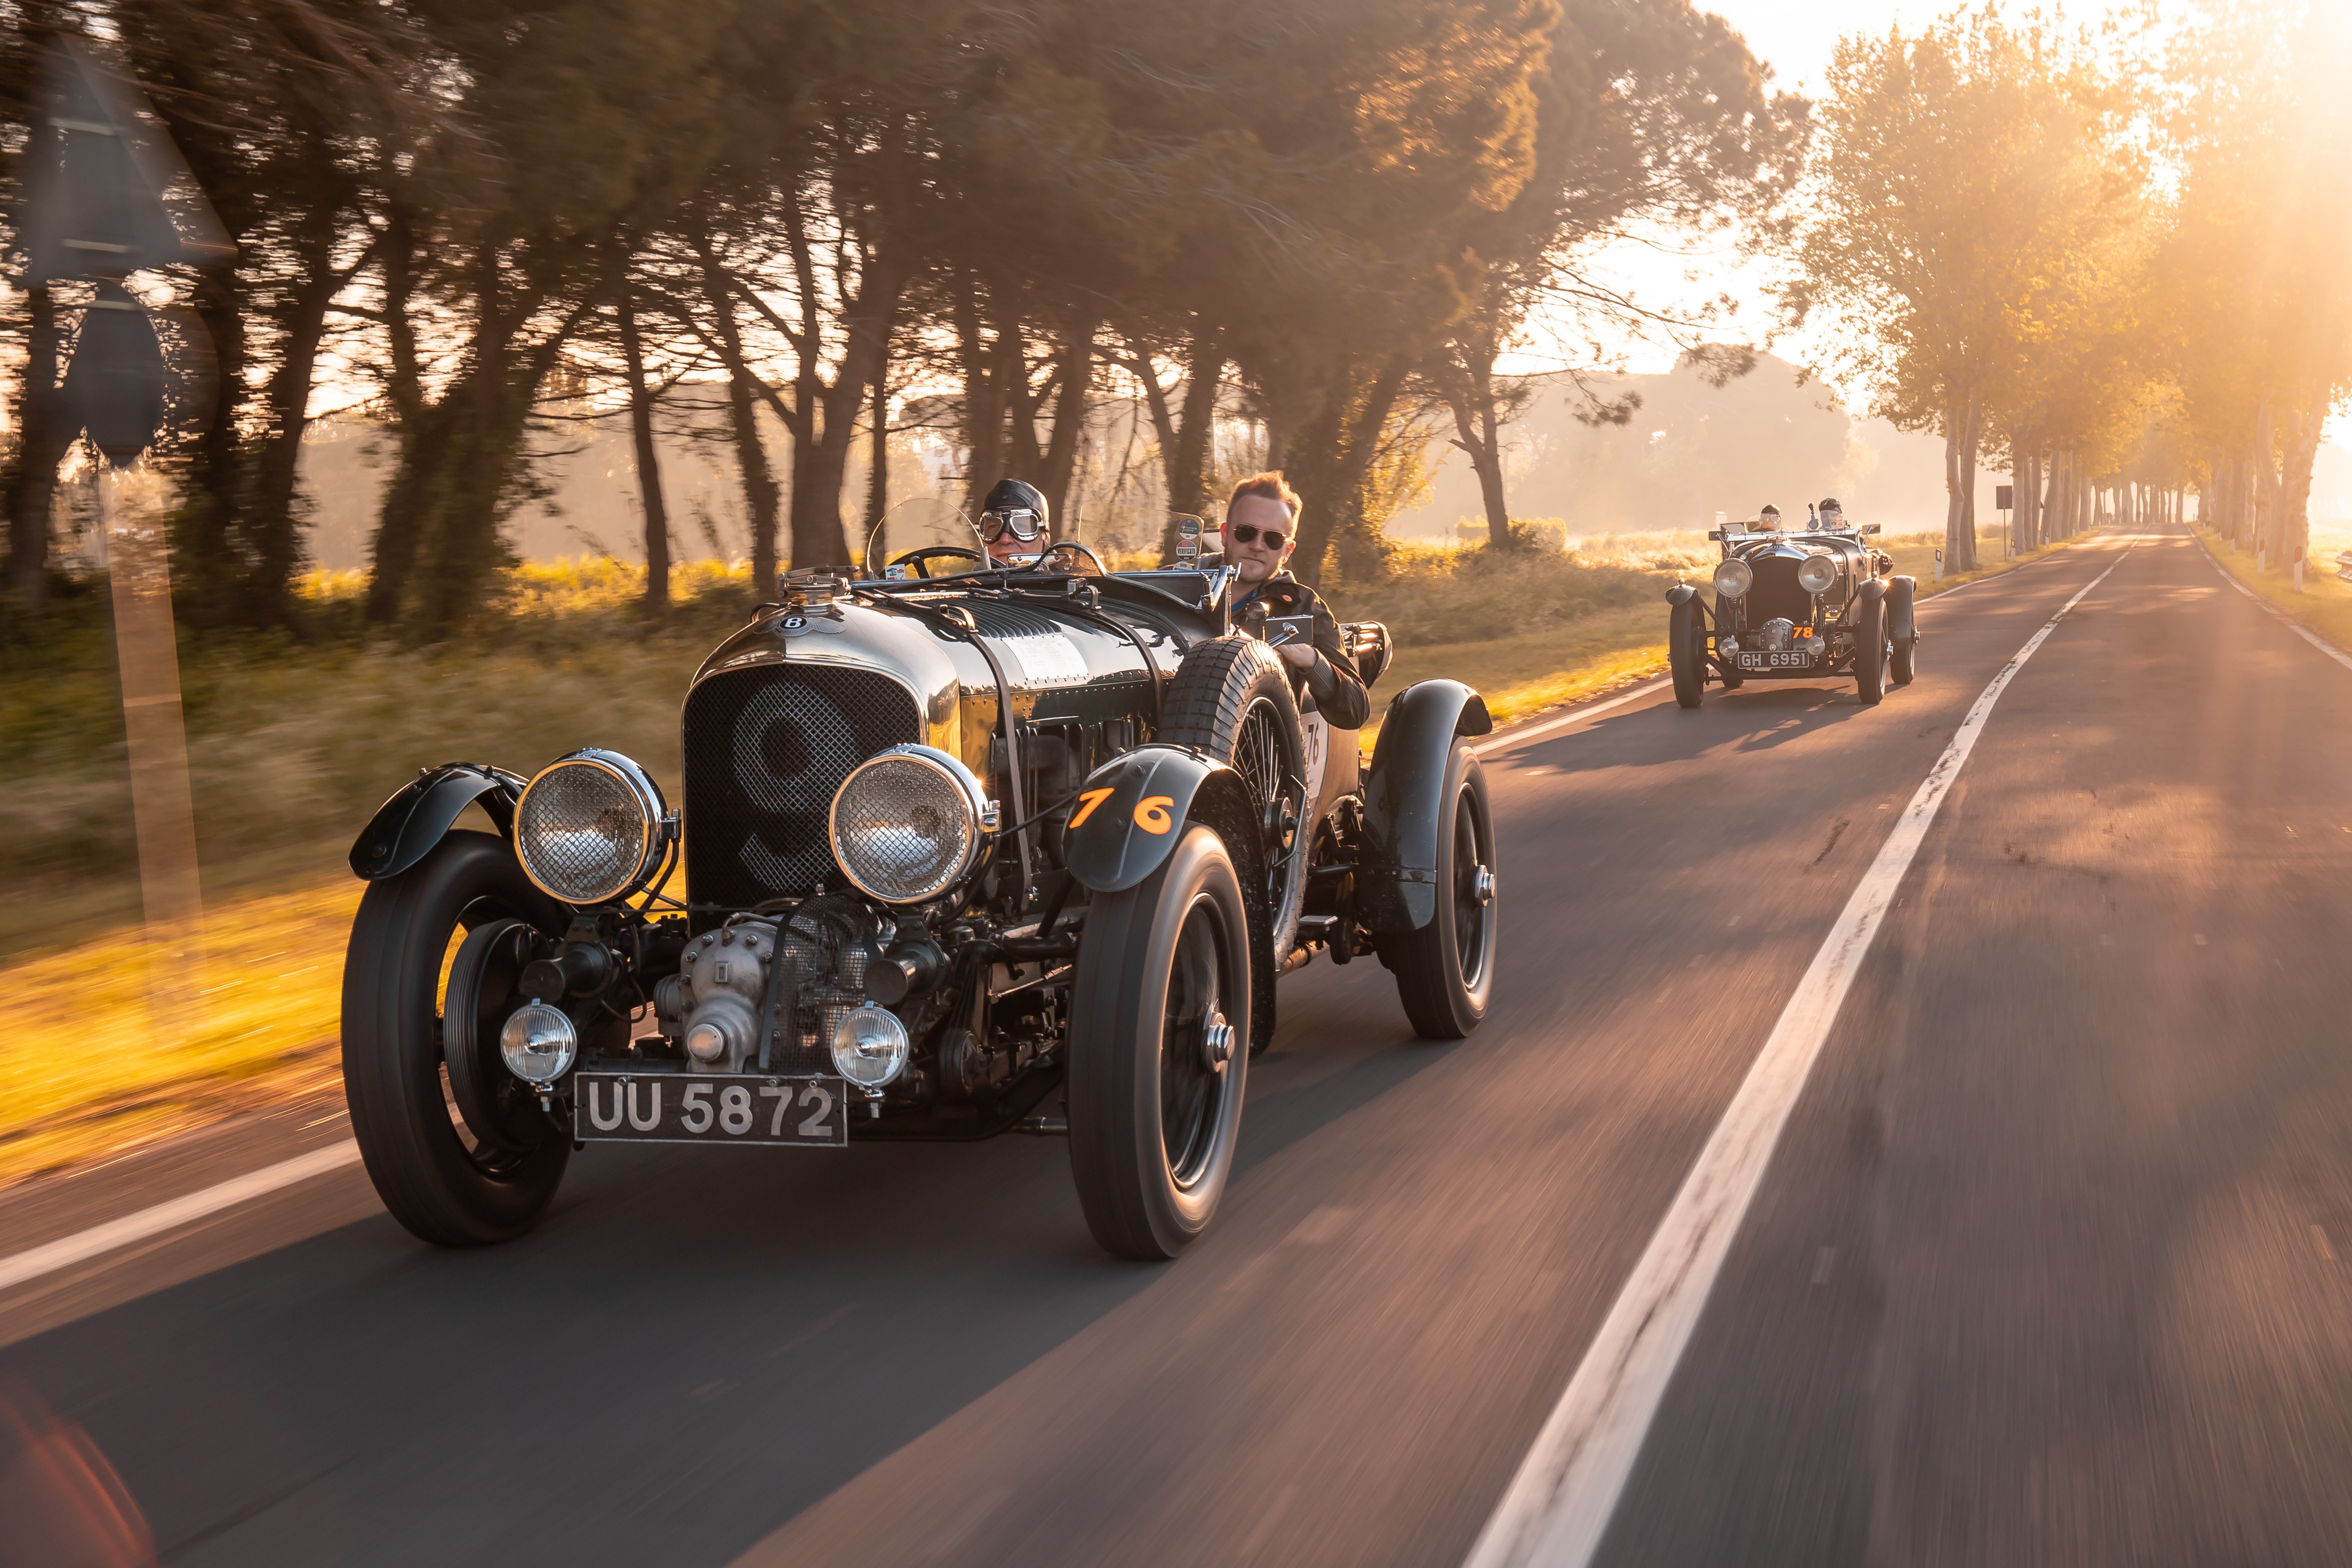 To celebrate its 100th anniversary, Bentley is producing just 12 of Sir Tim Birkin’s iconic 1929 4.5-litre Team Blower racing car.